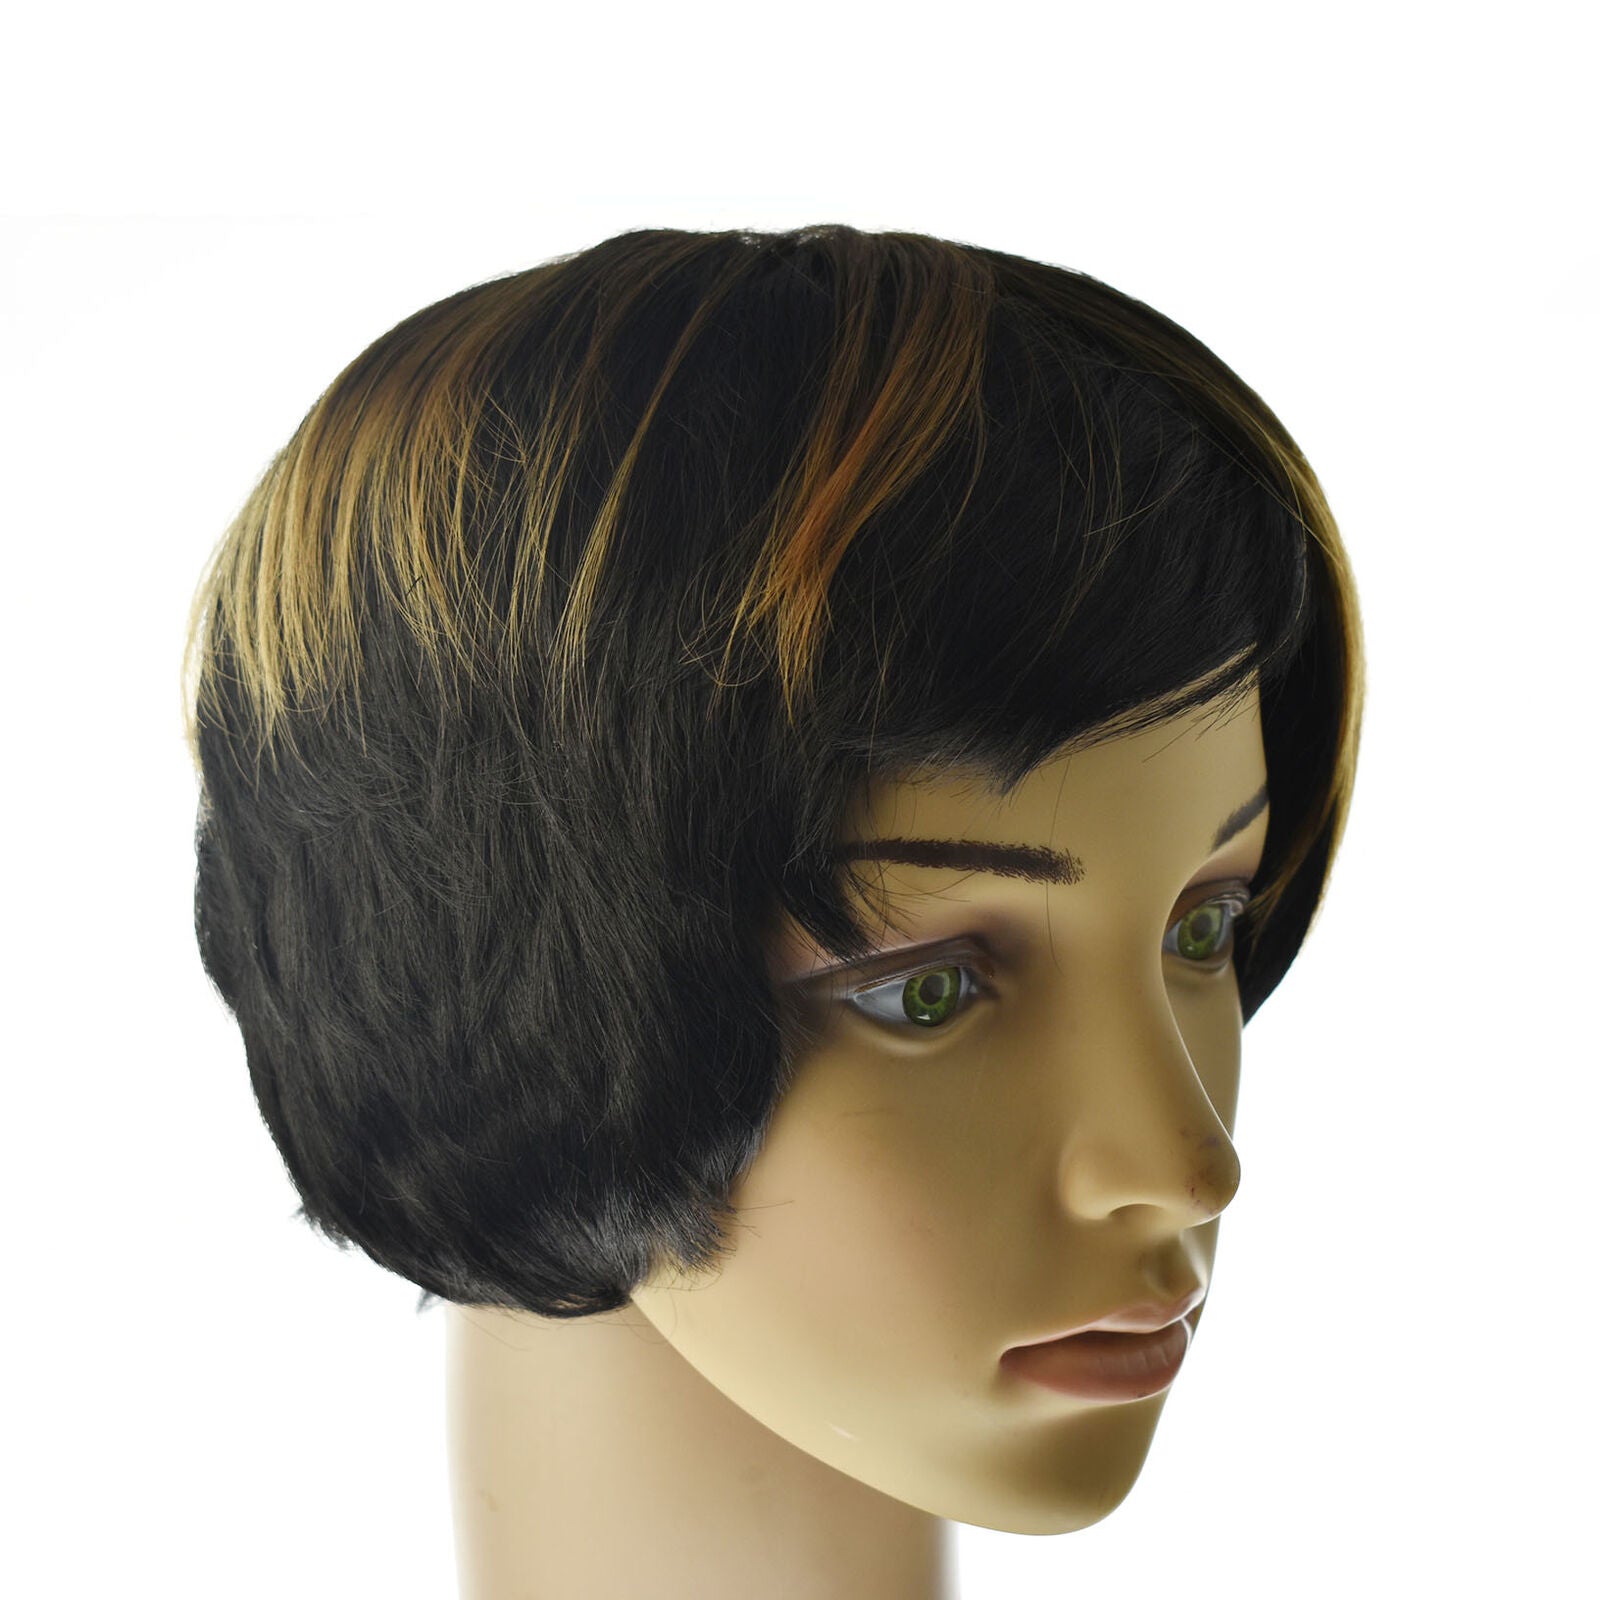 Real Remy Pixie Hair Full Wig Natural Short Cut Wavy Ombre Black Modern Style